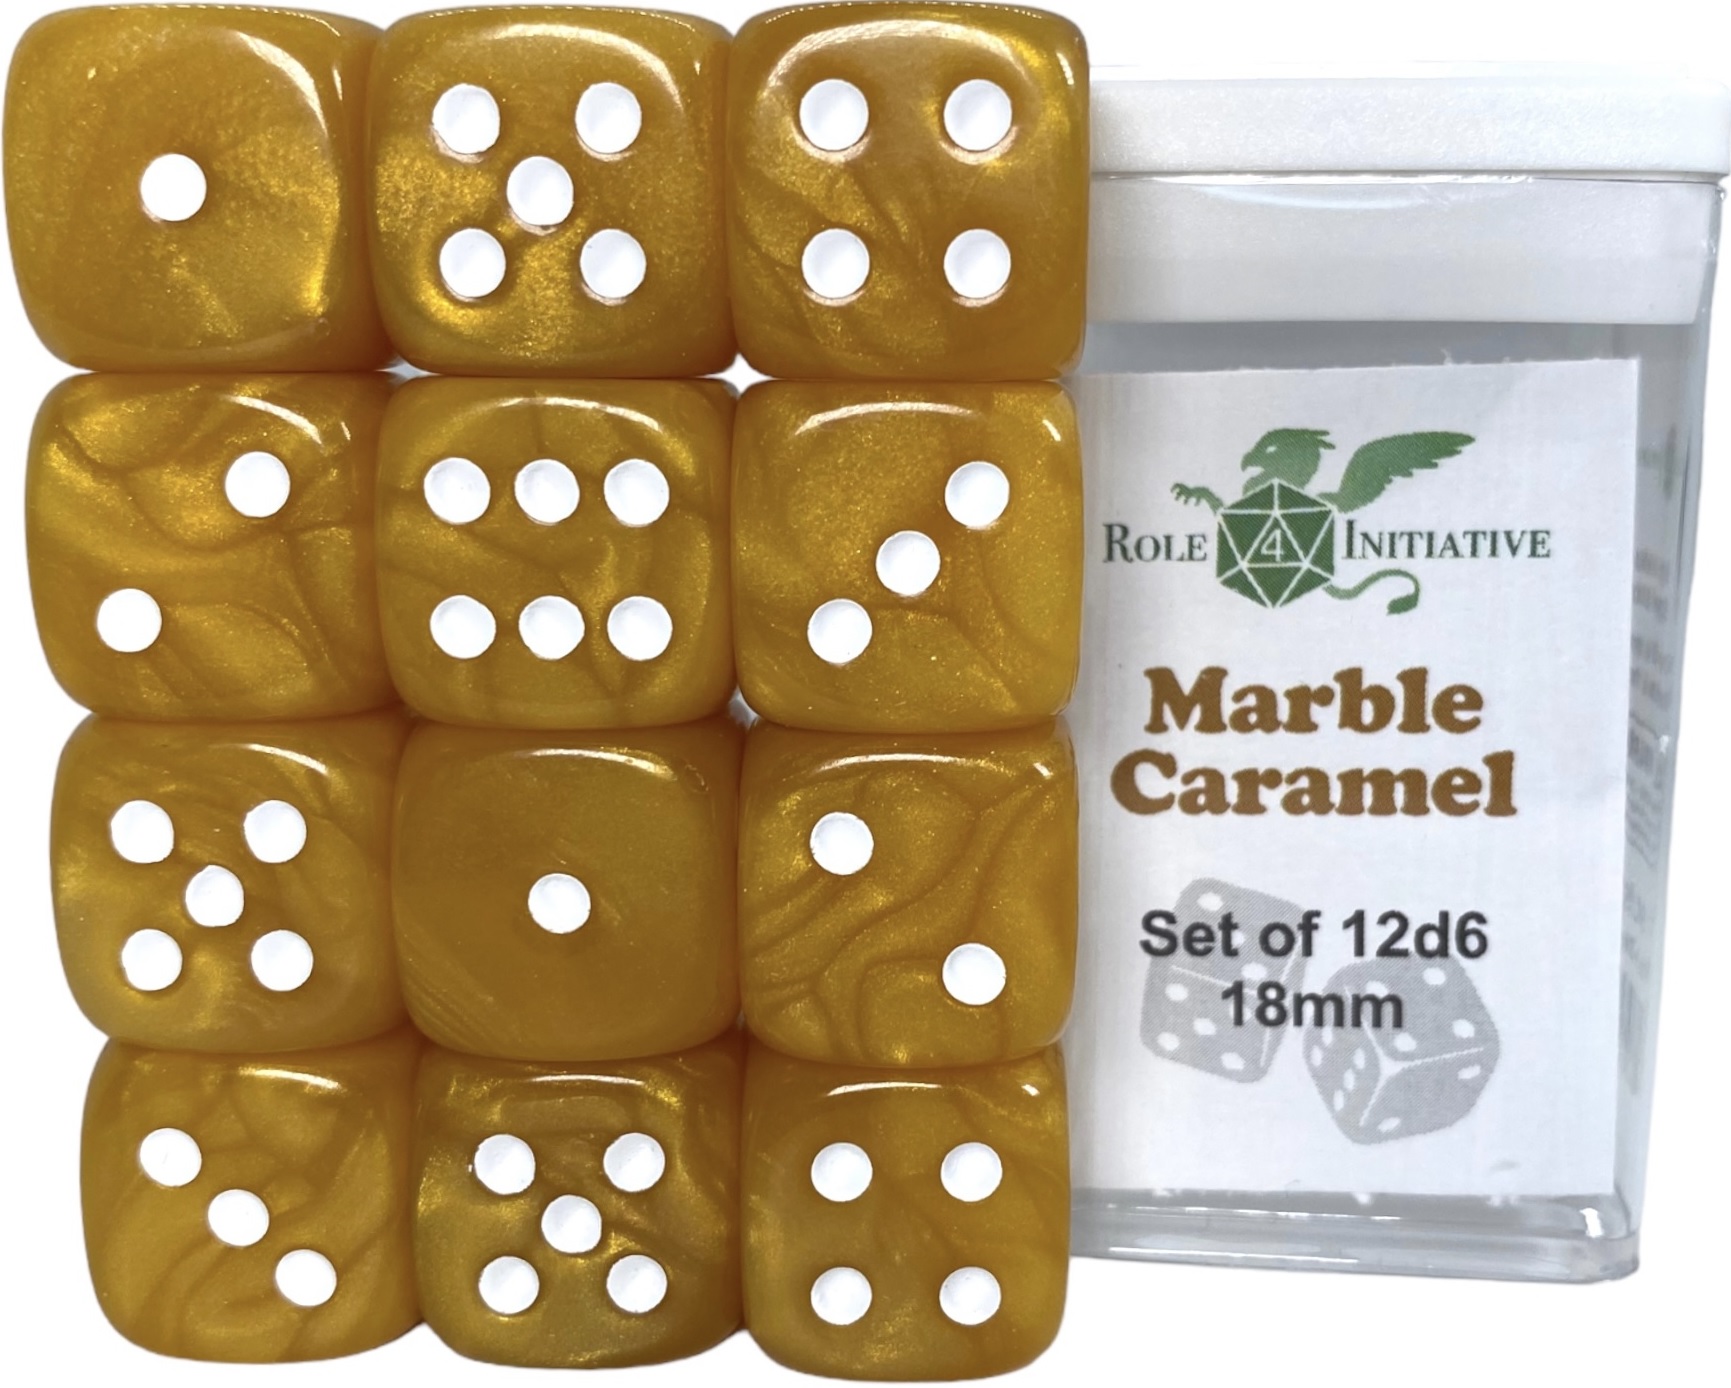 Role 4 Initiative: 12 D6 Pips Dice Set: Marble Caramel 18MM 